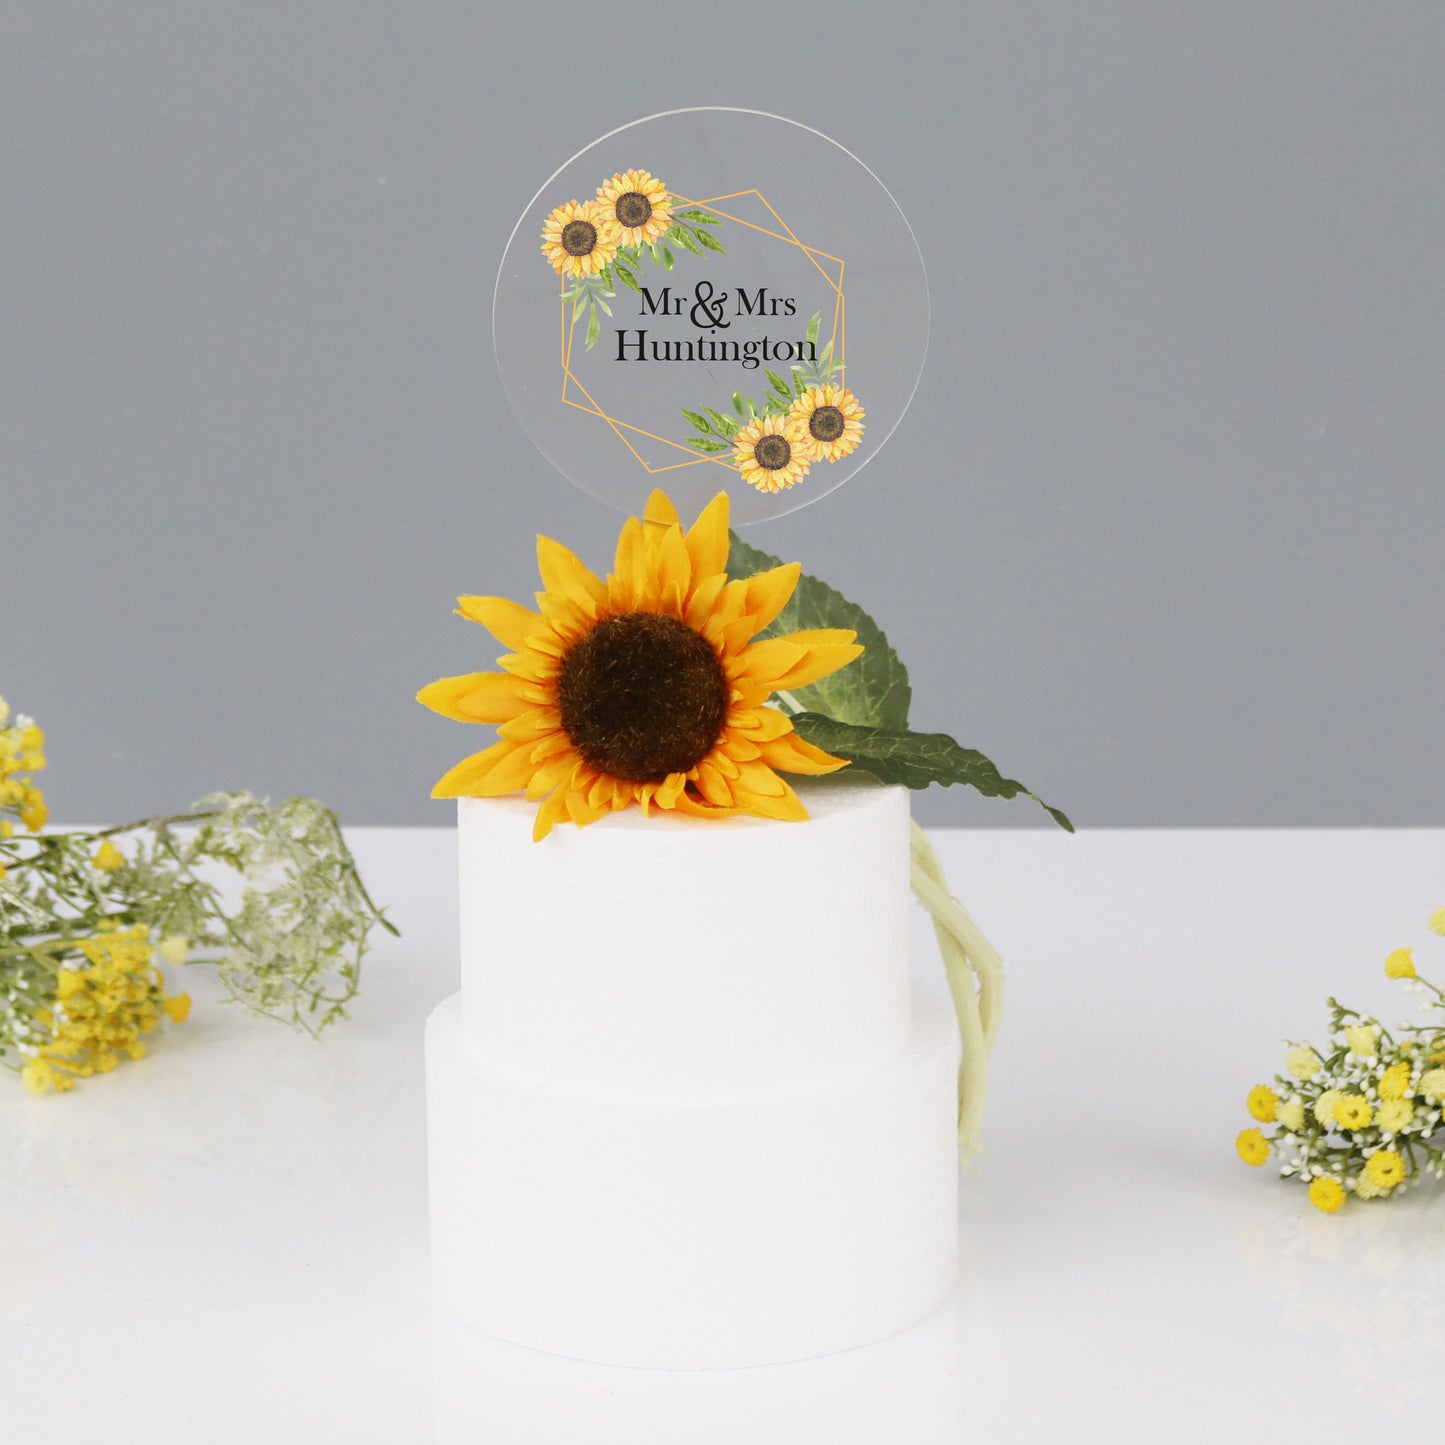 Personalised Wedding Cake Topper With Sunflowers